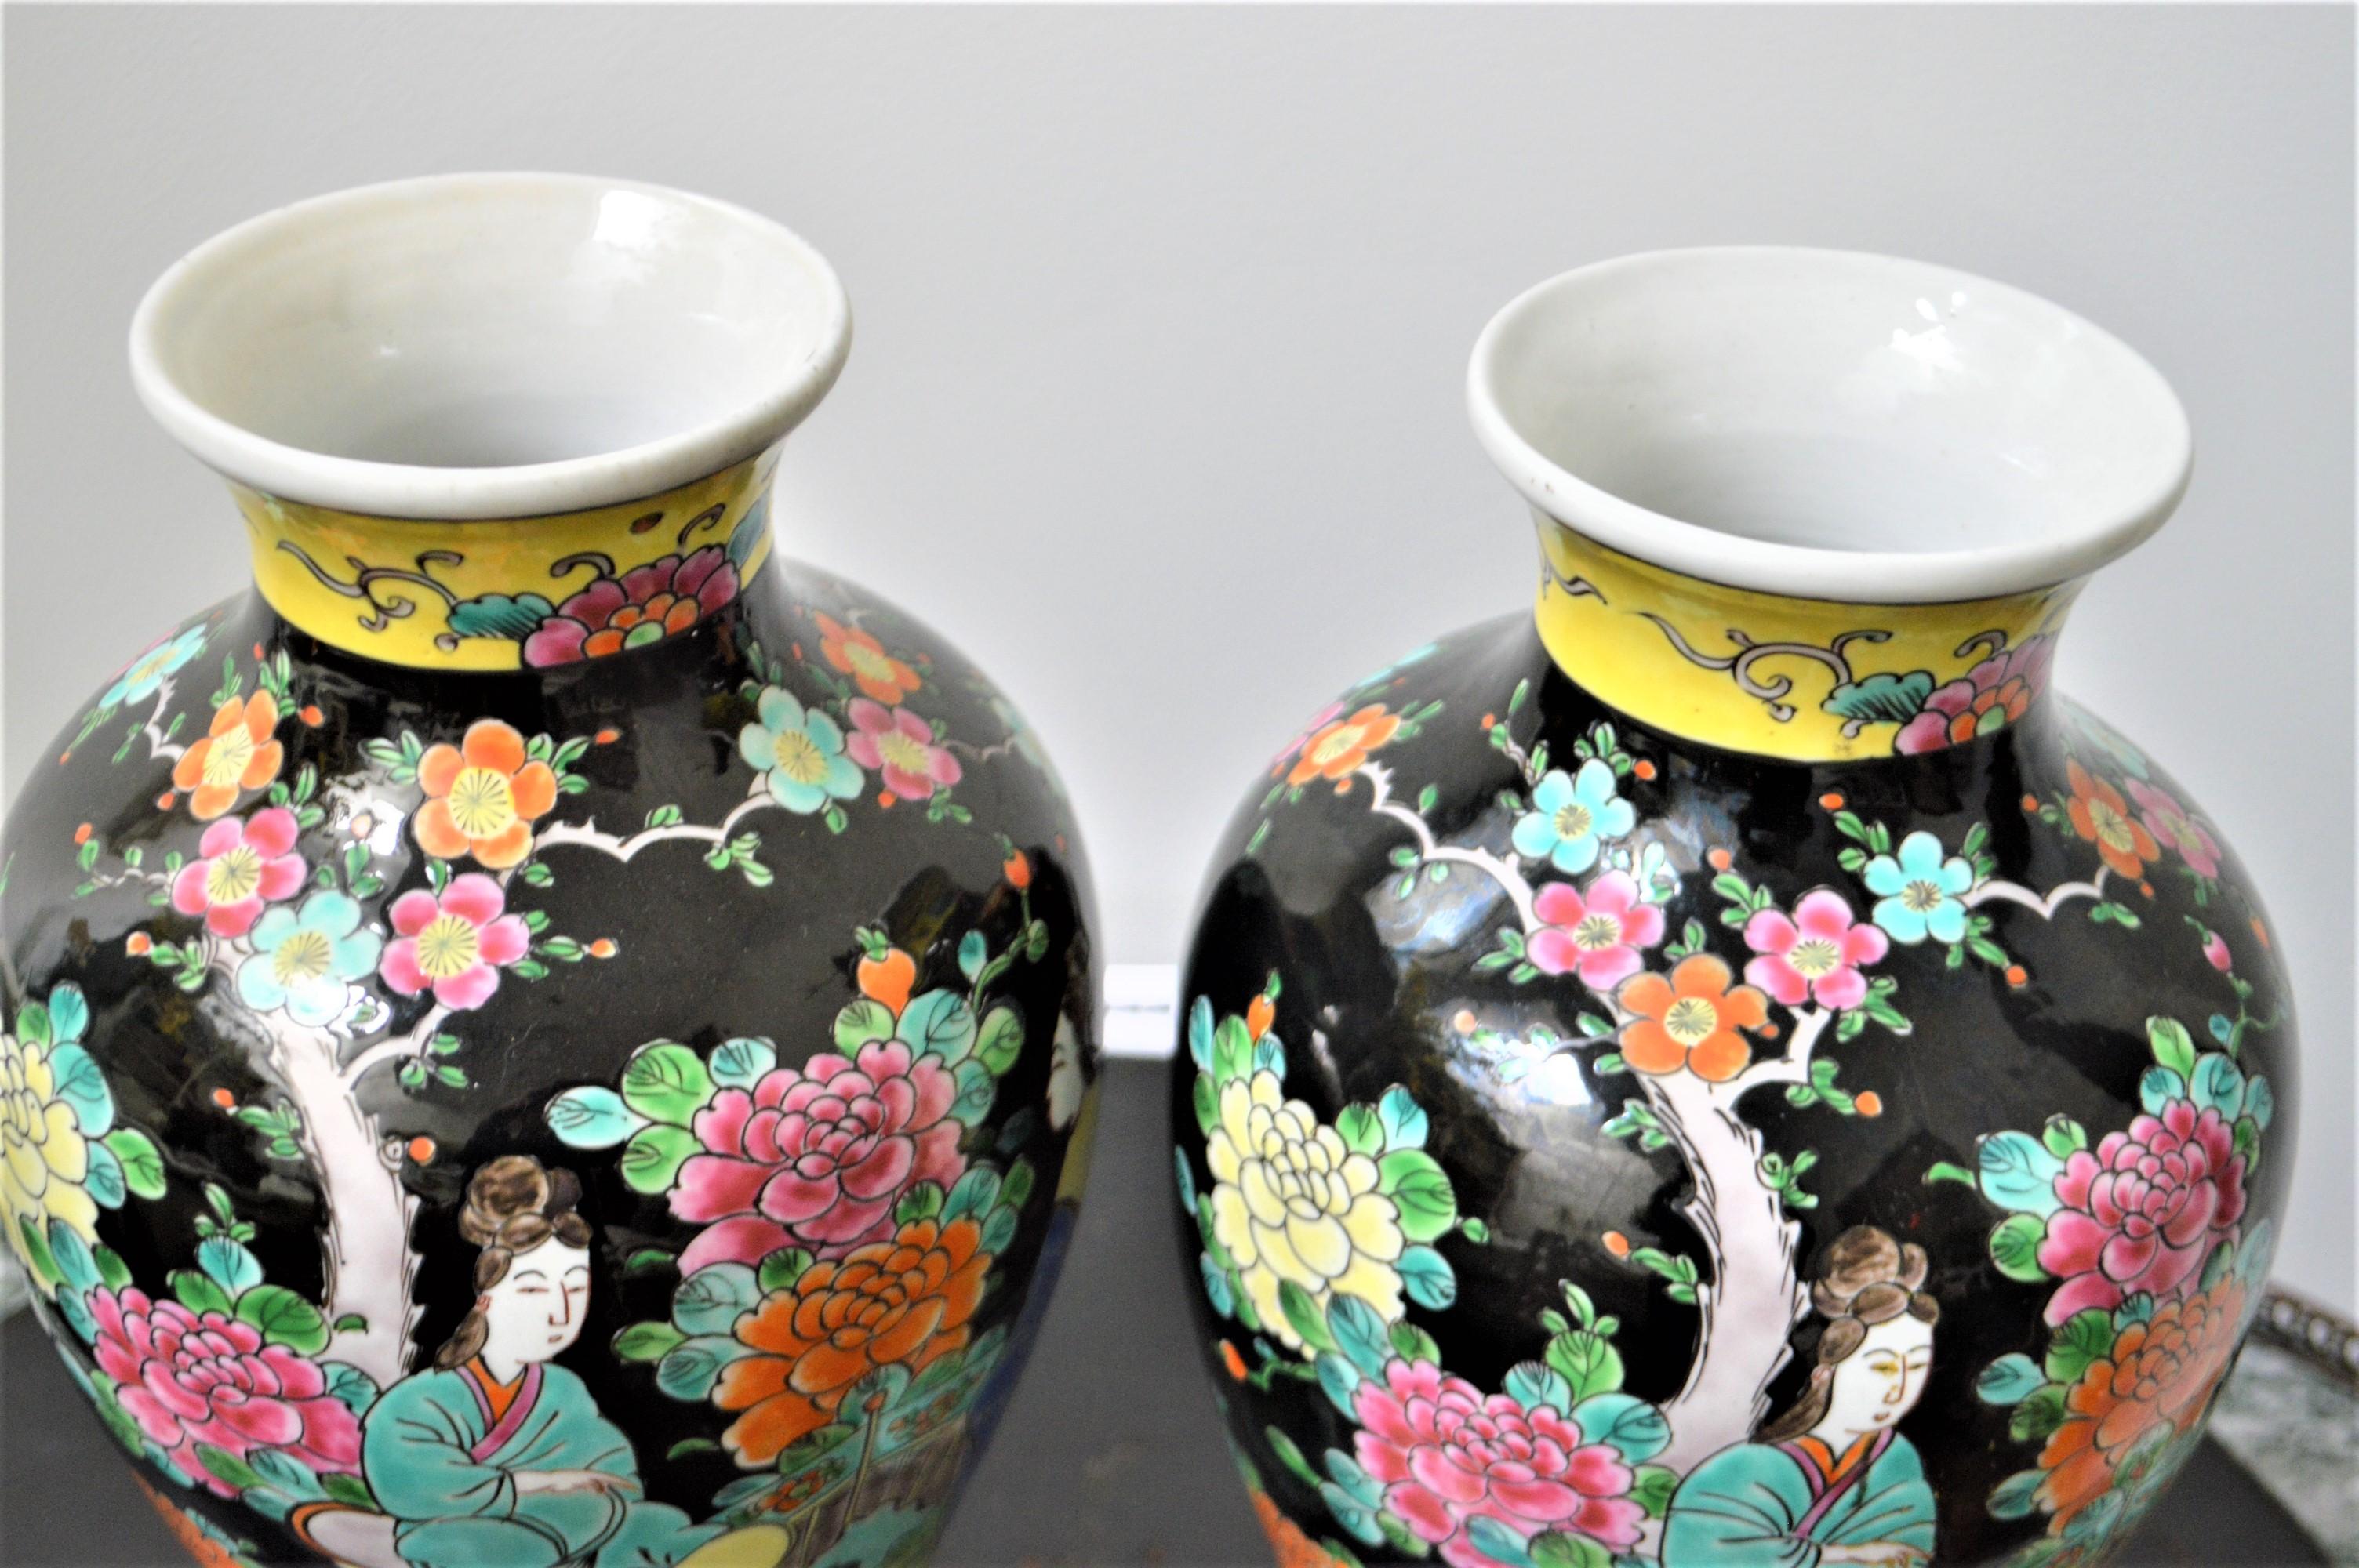 Hand painted glazed porcelain vases on a black background showing two female figures in a garden setting. The colors are very attractive with beautiful pinks, orange, blue and green. There are slight differences in the rendering of each vases.